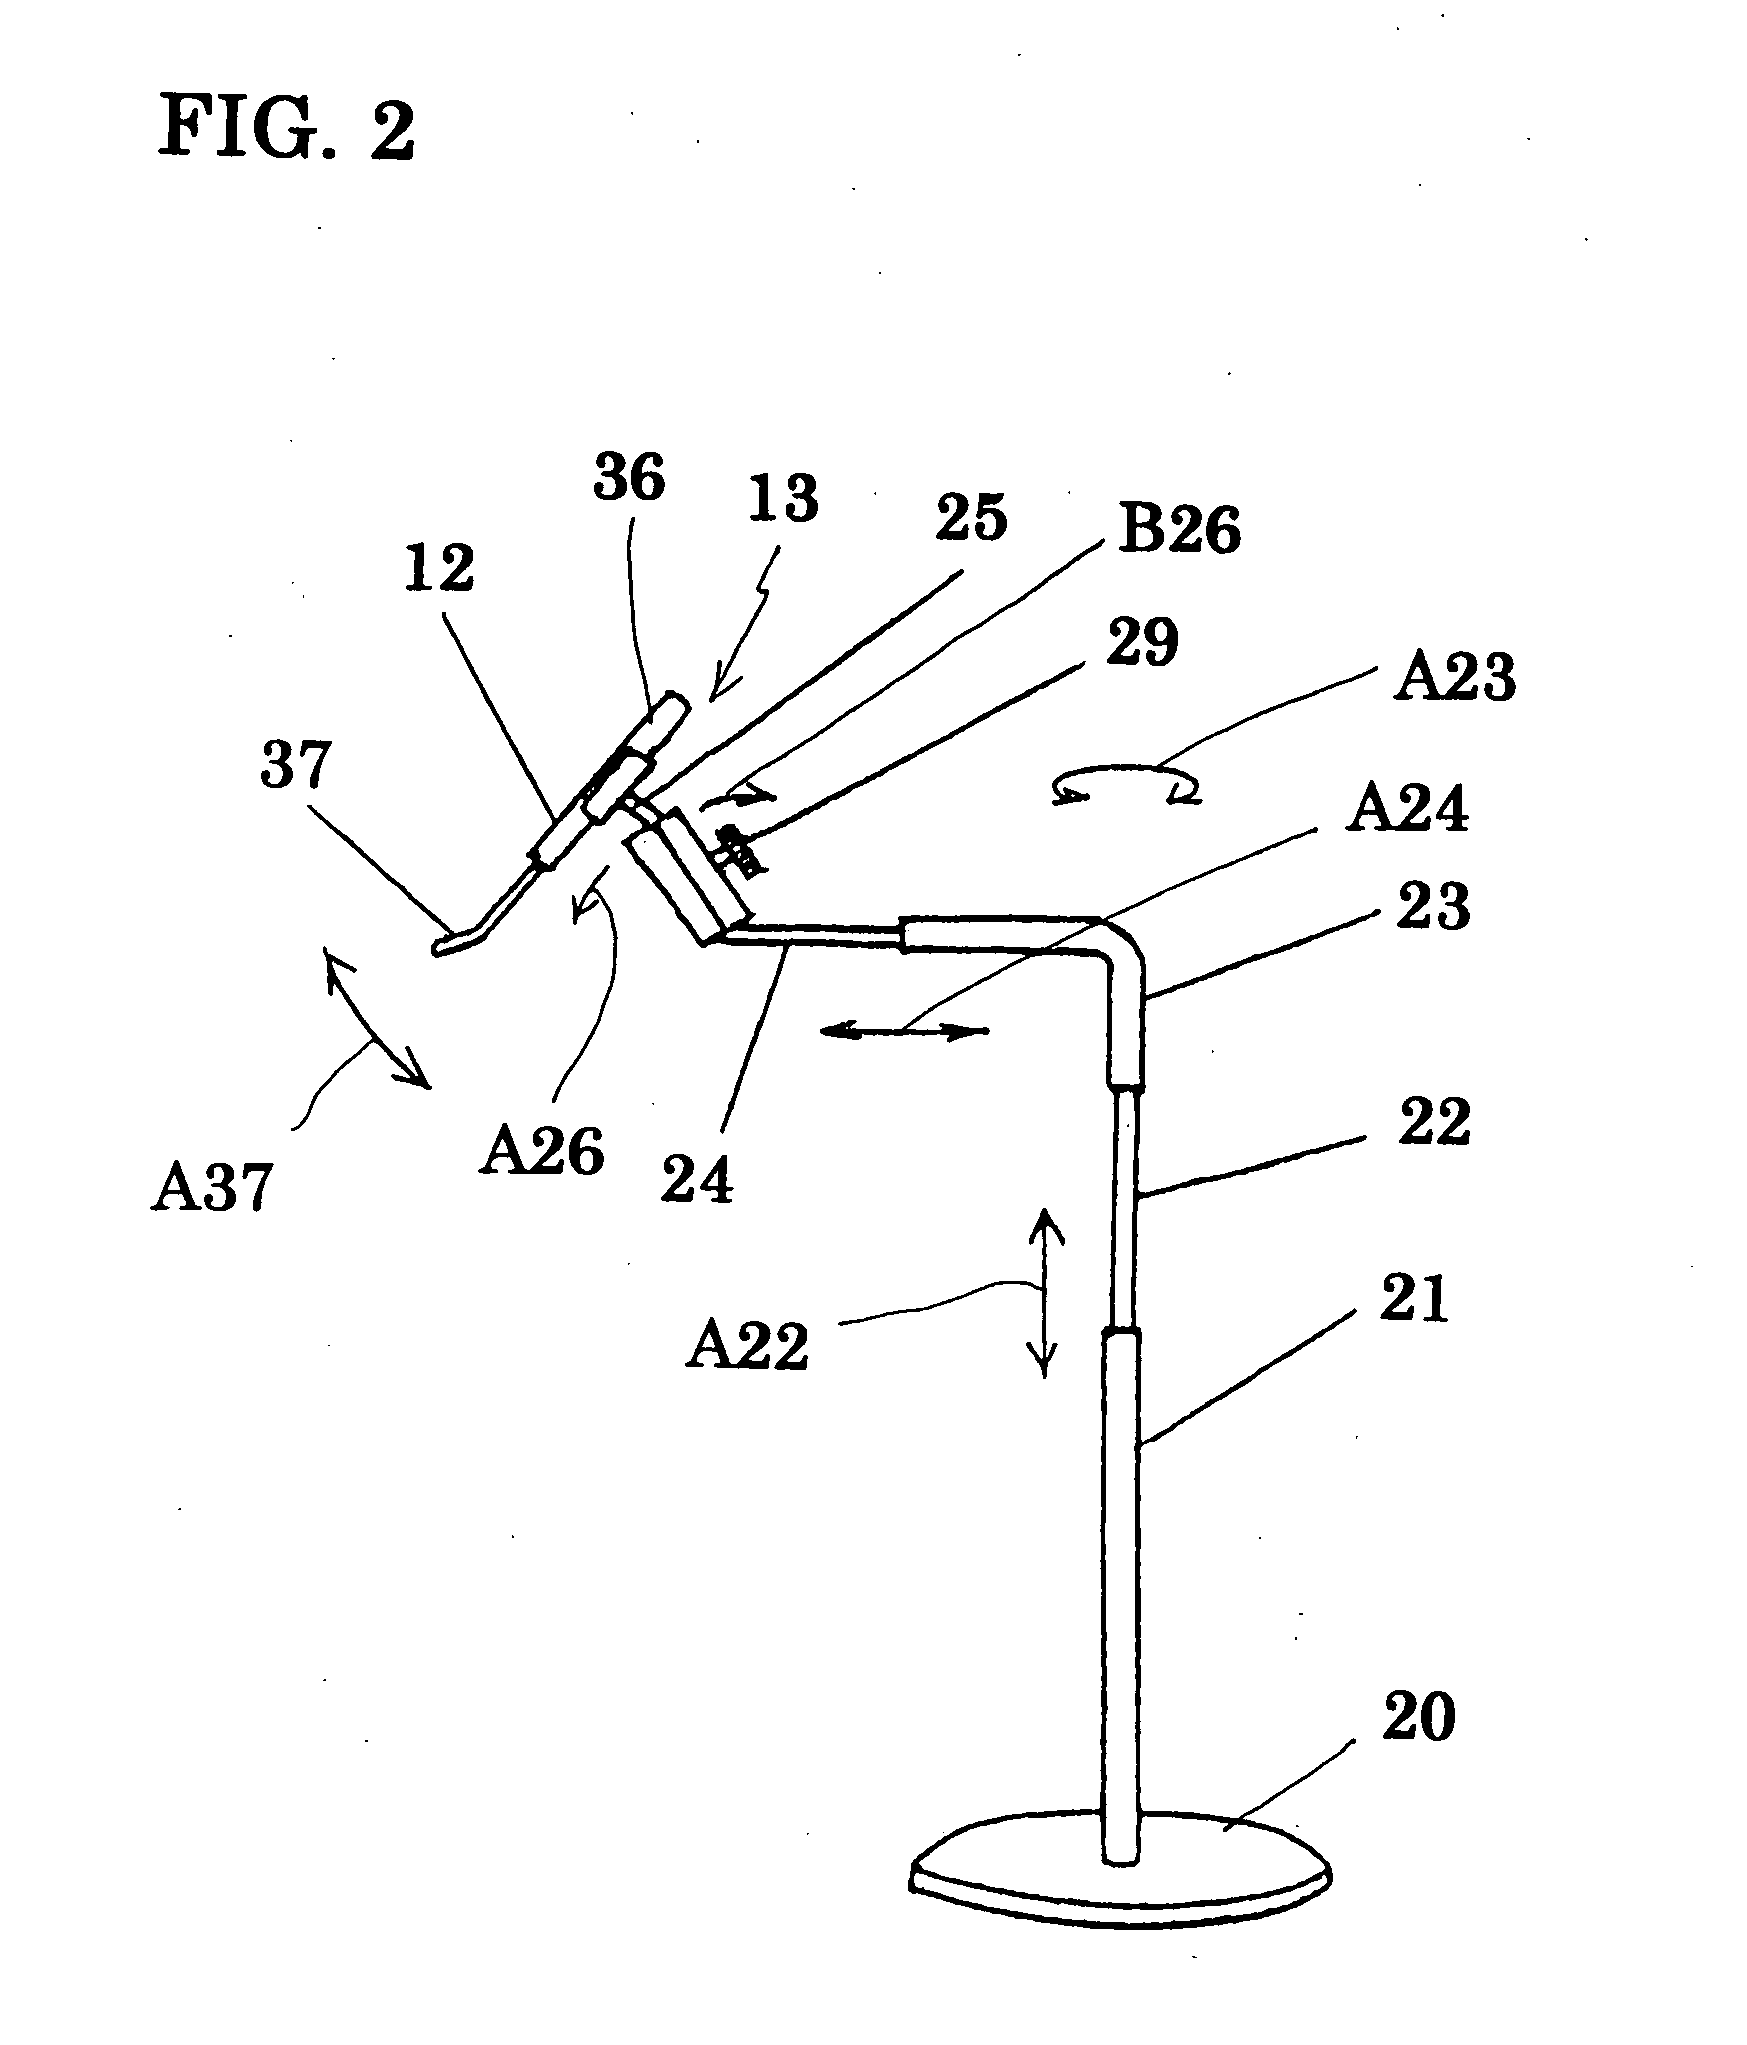 Apparatus for dental diagnosis and treatment